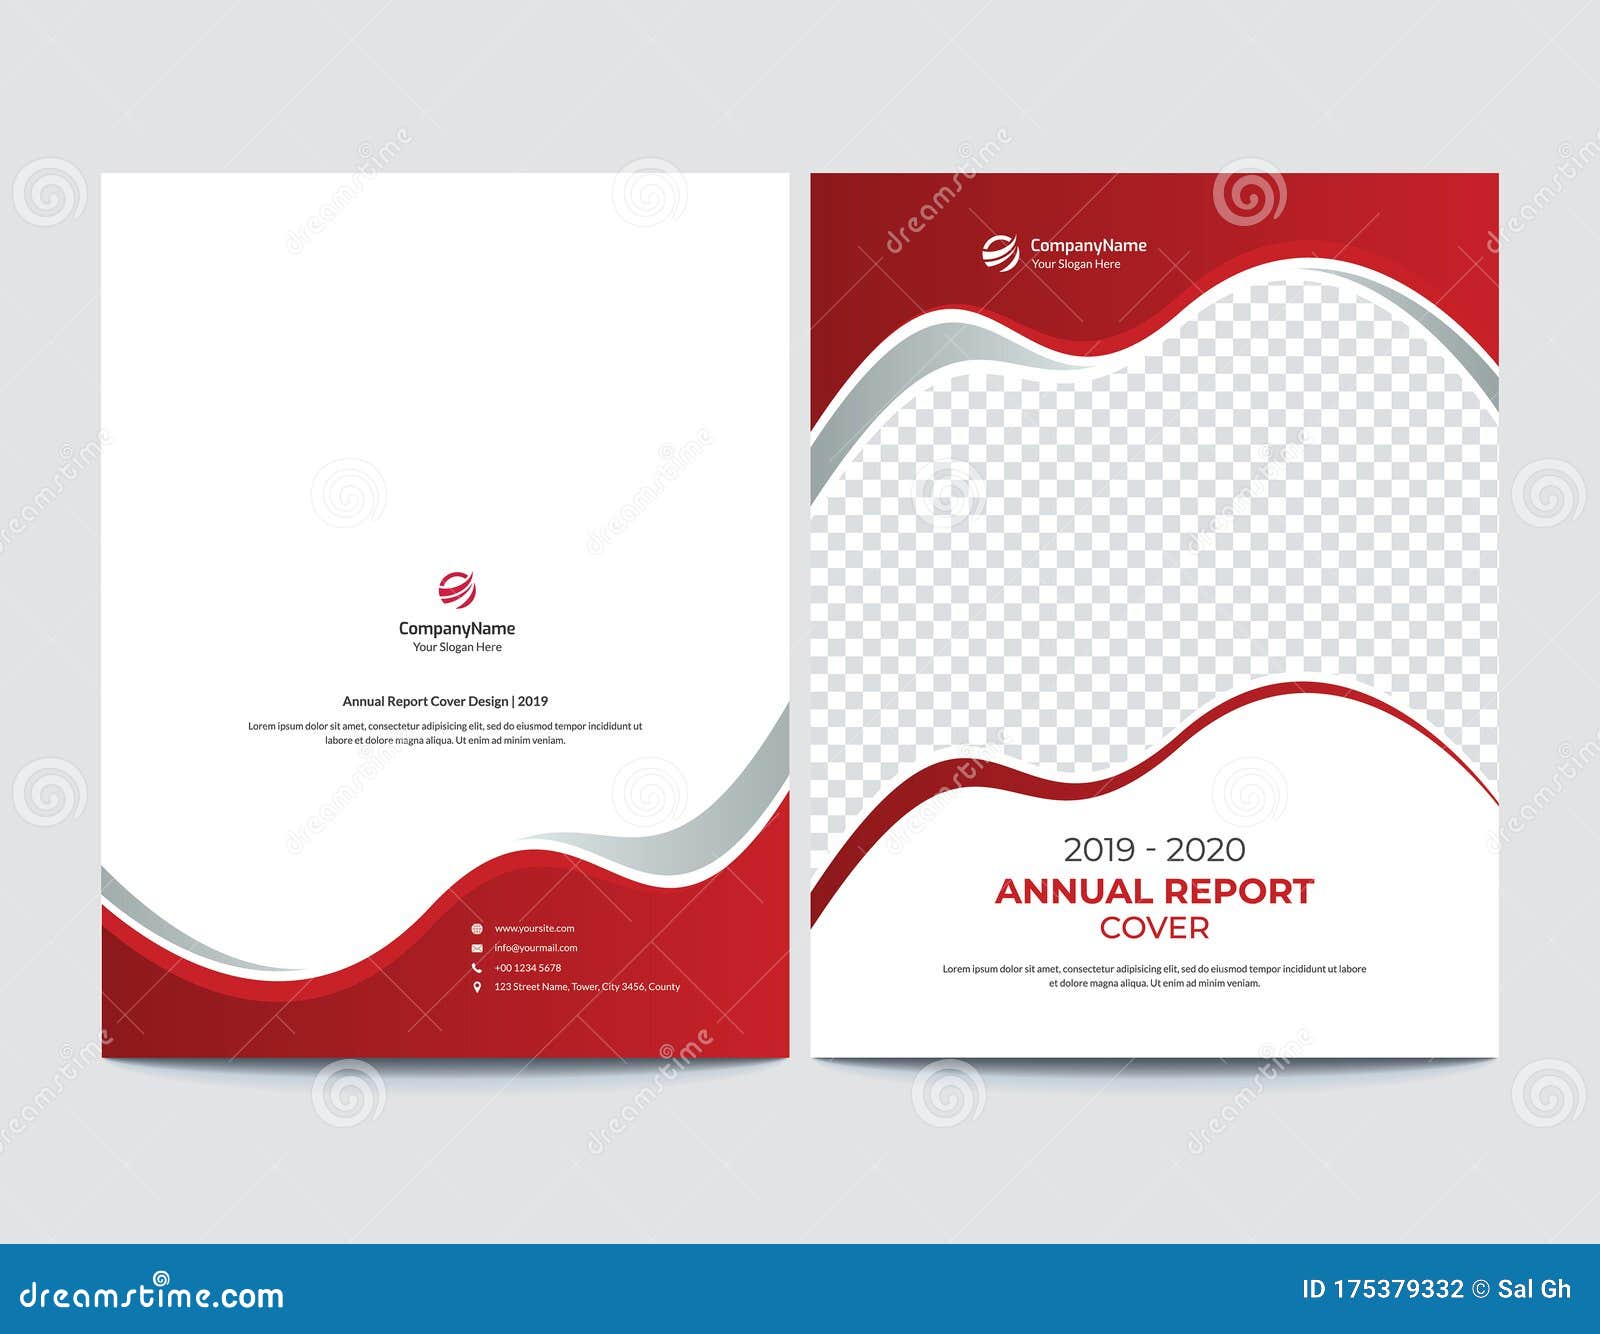 Front and Back Annual Report Cover Design with Image Stock Vector